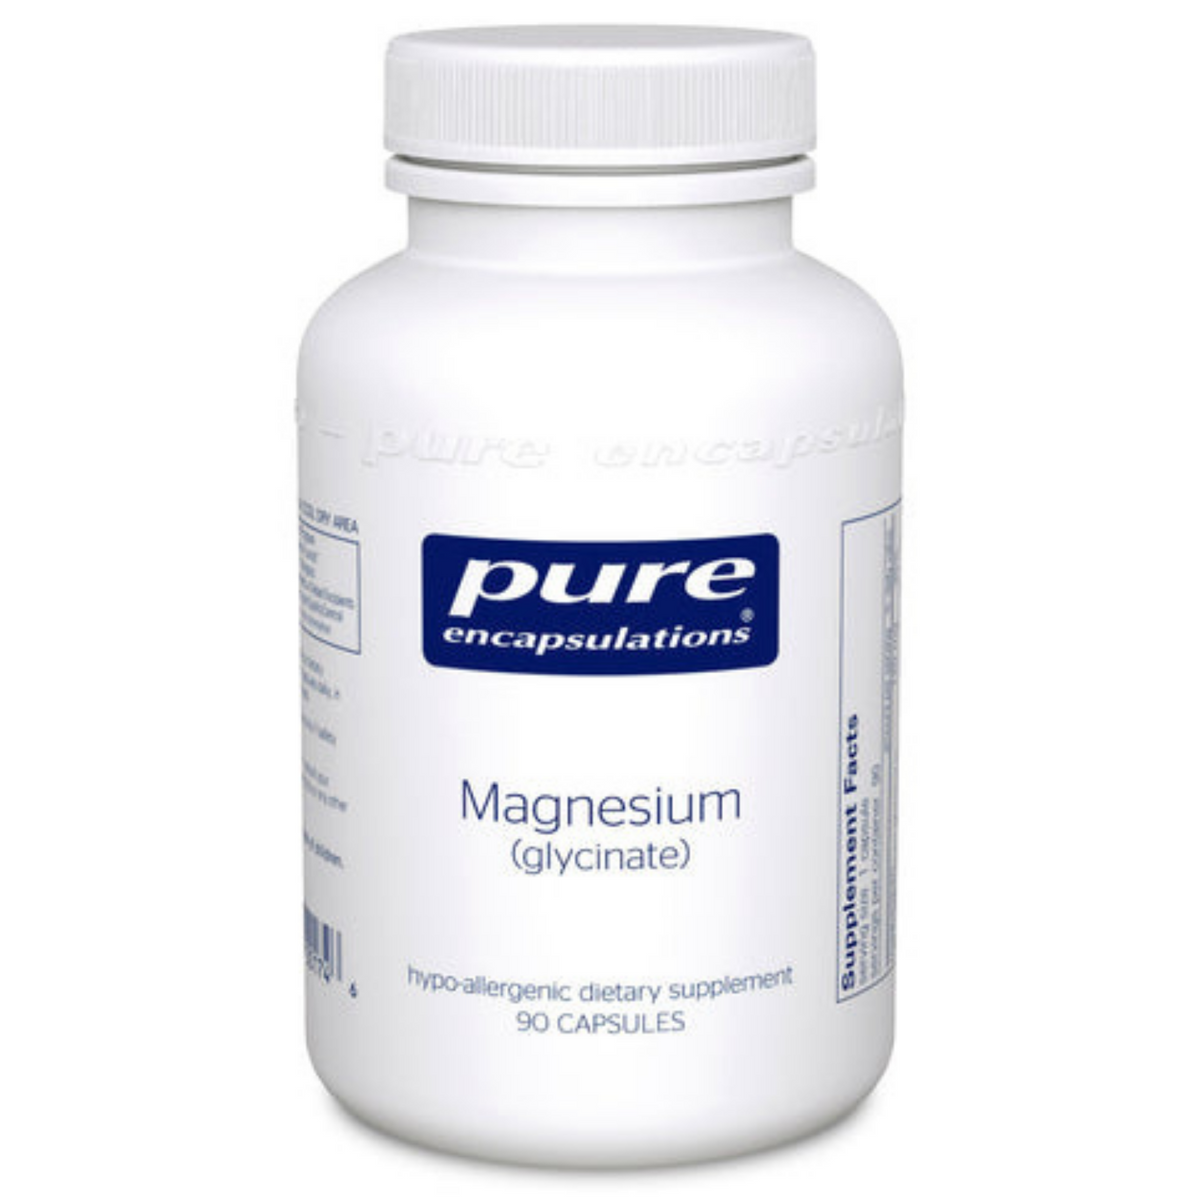 Primary Image of Magnesium (glycinate) 120mg Vcaps (90 count)